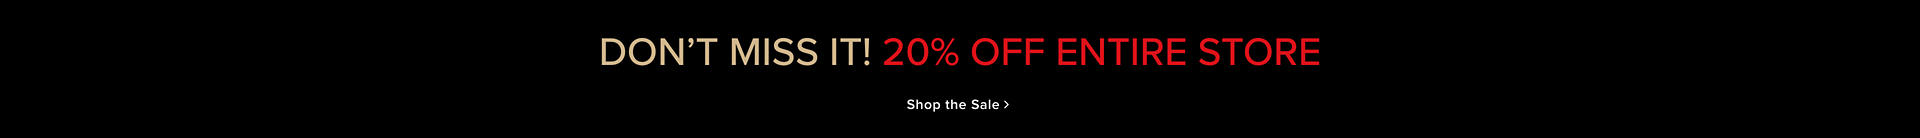 20% Off Entire Store Sale Banner